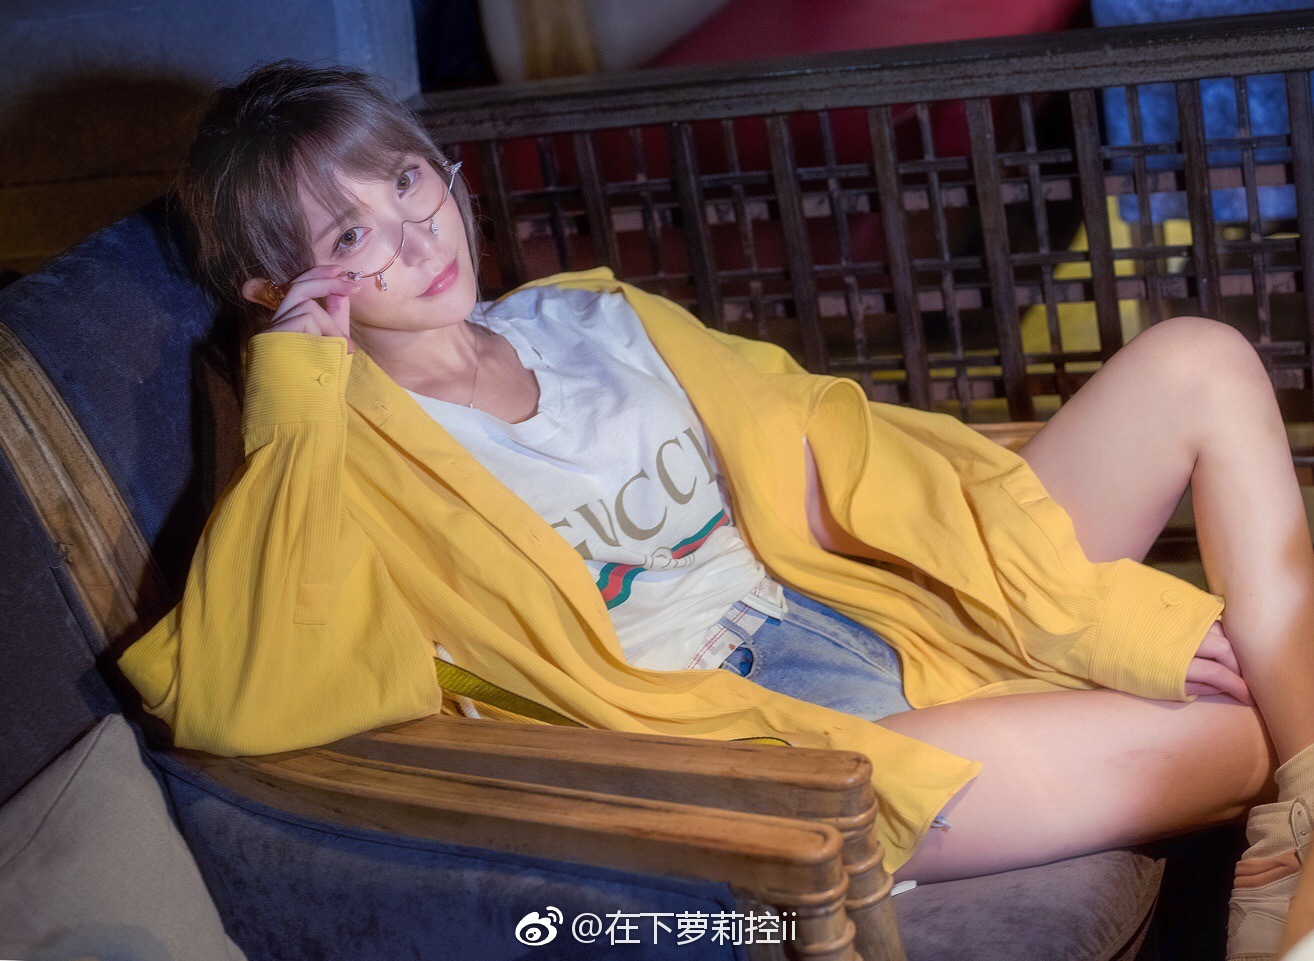 Demon King next girl control II weibo with Picture 232(97)